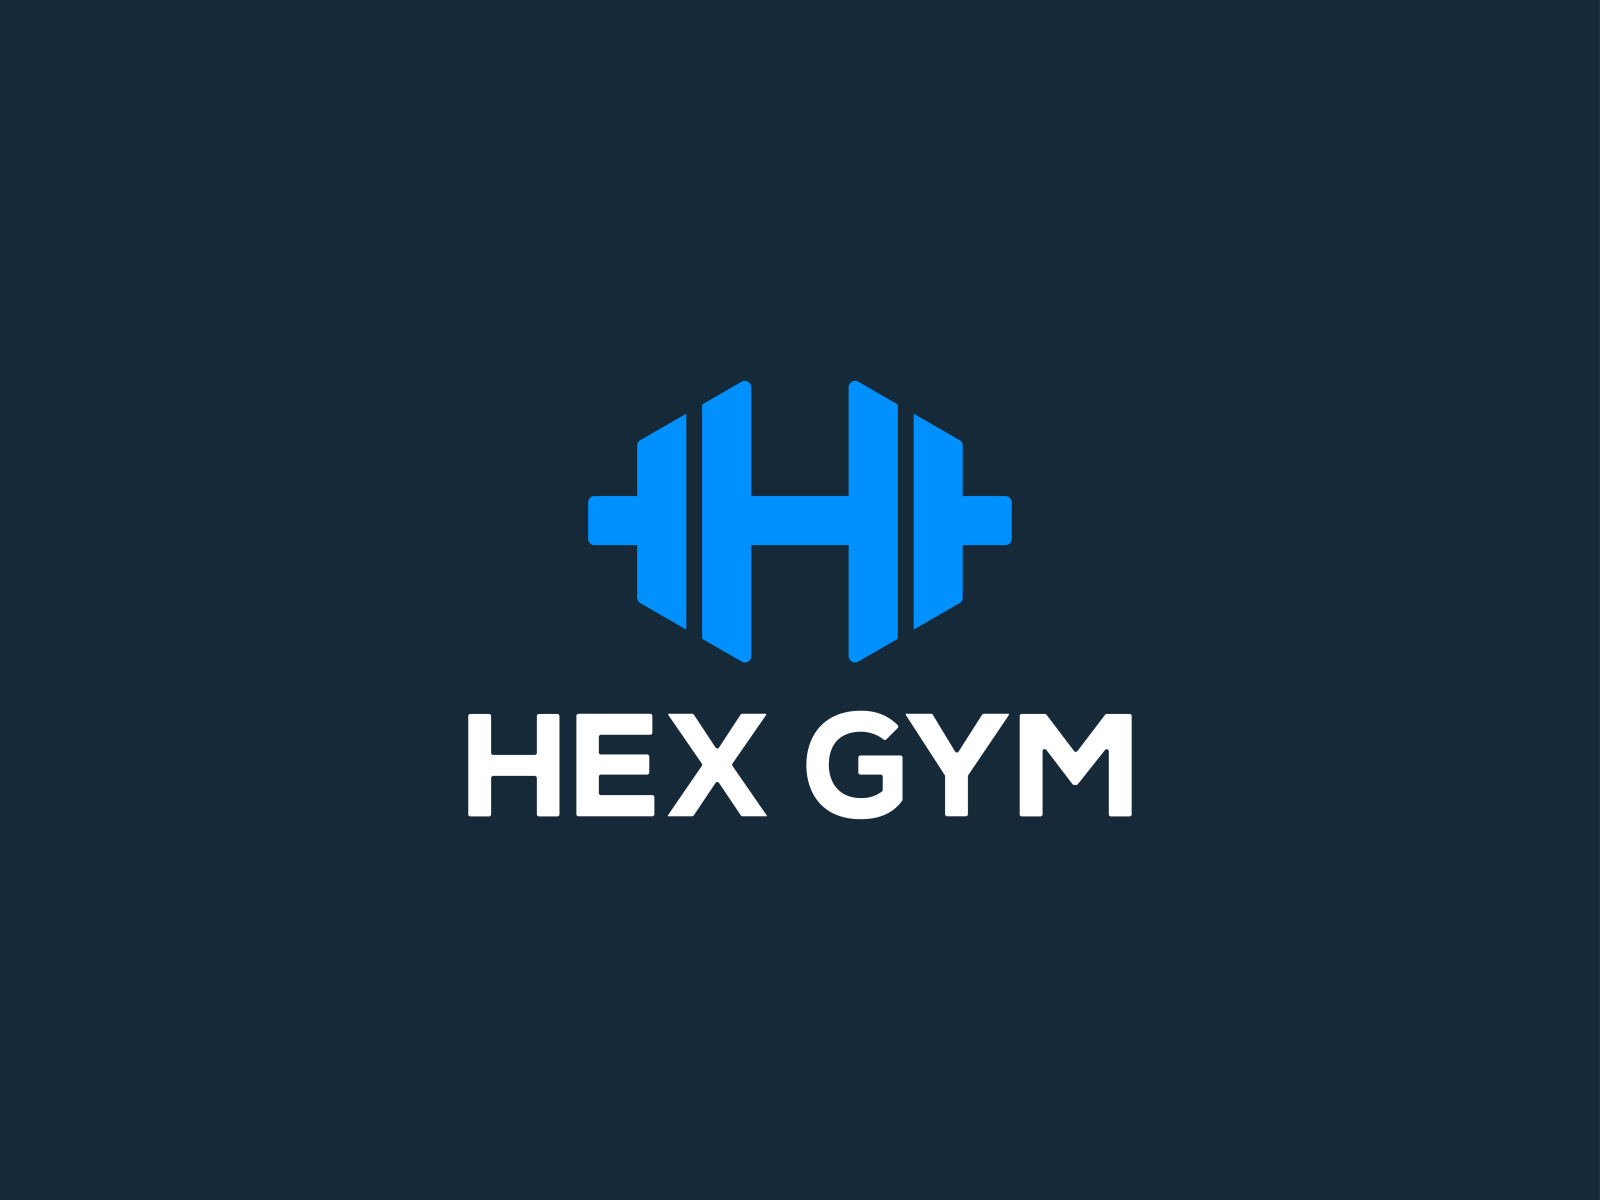 Hex Gym - Dumbbell Logo by Nick Budrewicz on Dribbble